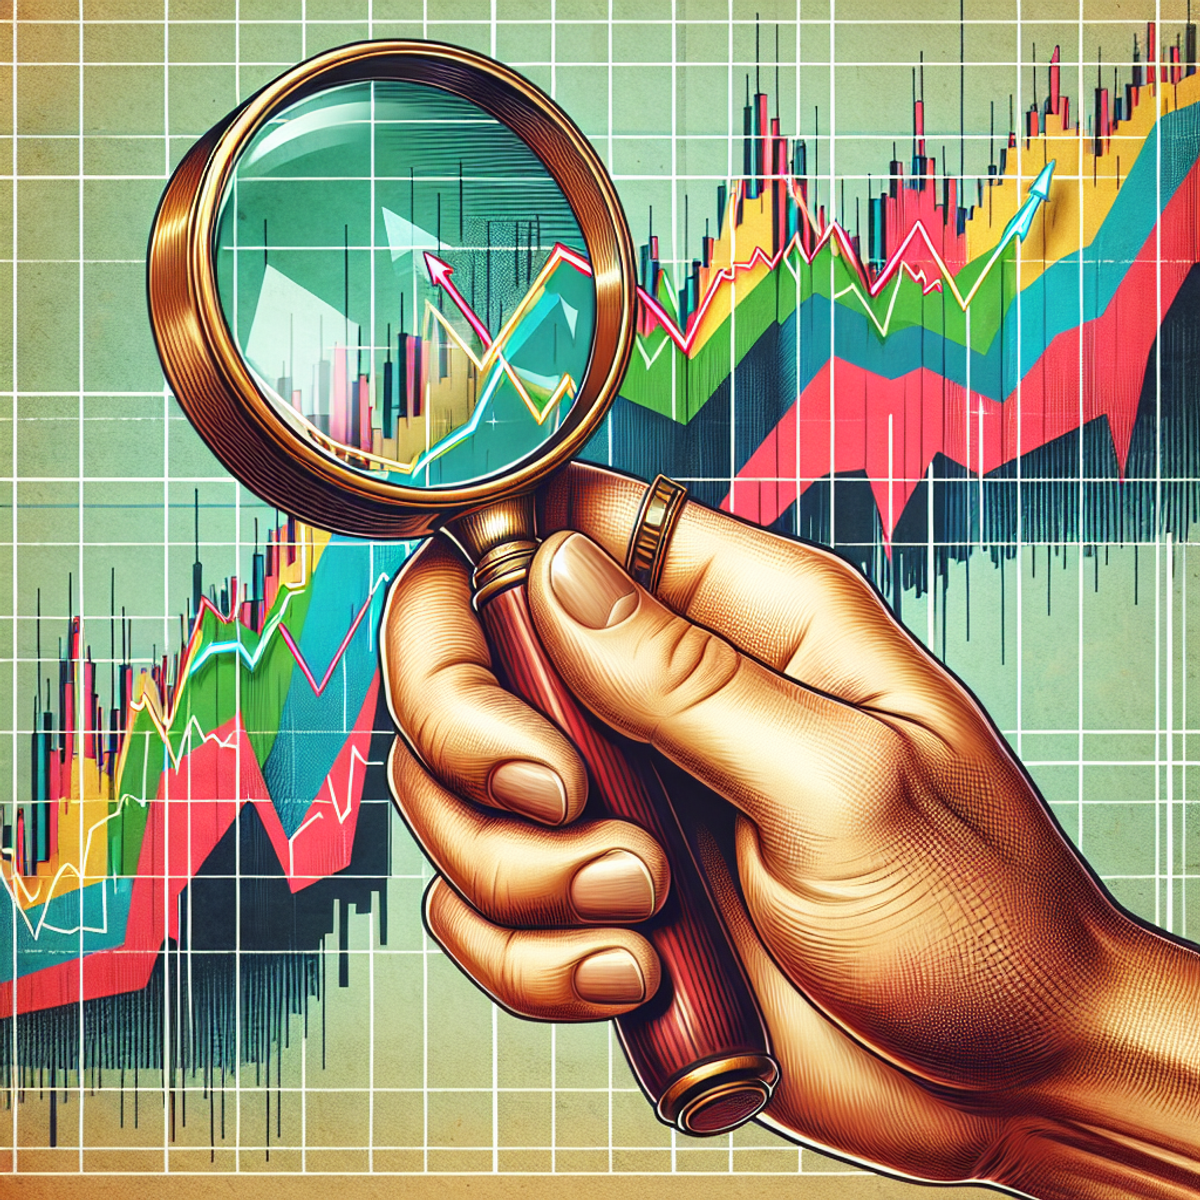 A close-up image of a Middle-Eastern female's hand confidently holding a vintage magnifying glass over a vibrant stock market graph, with colorful arrows and bars symbolizing market fluctuations. The hand is adorned with a simple gold ring, adding a touch of elegance to the scene.